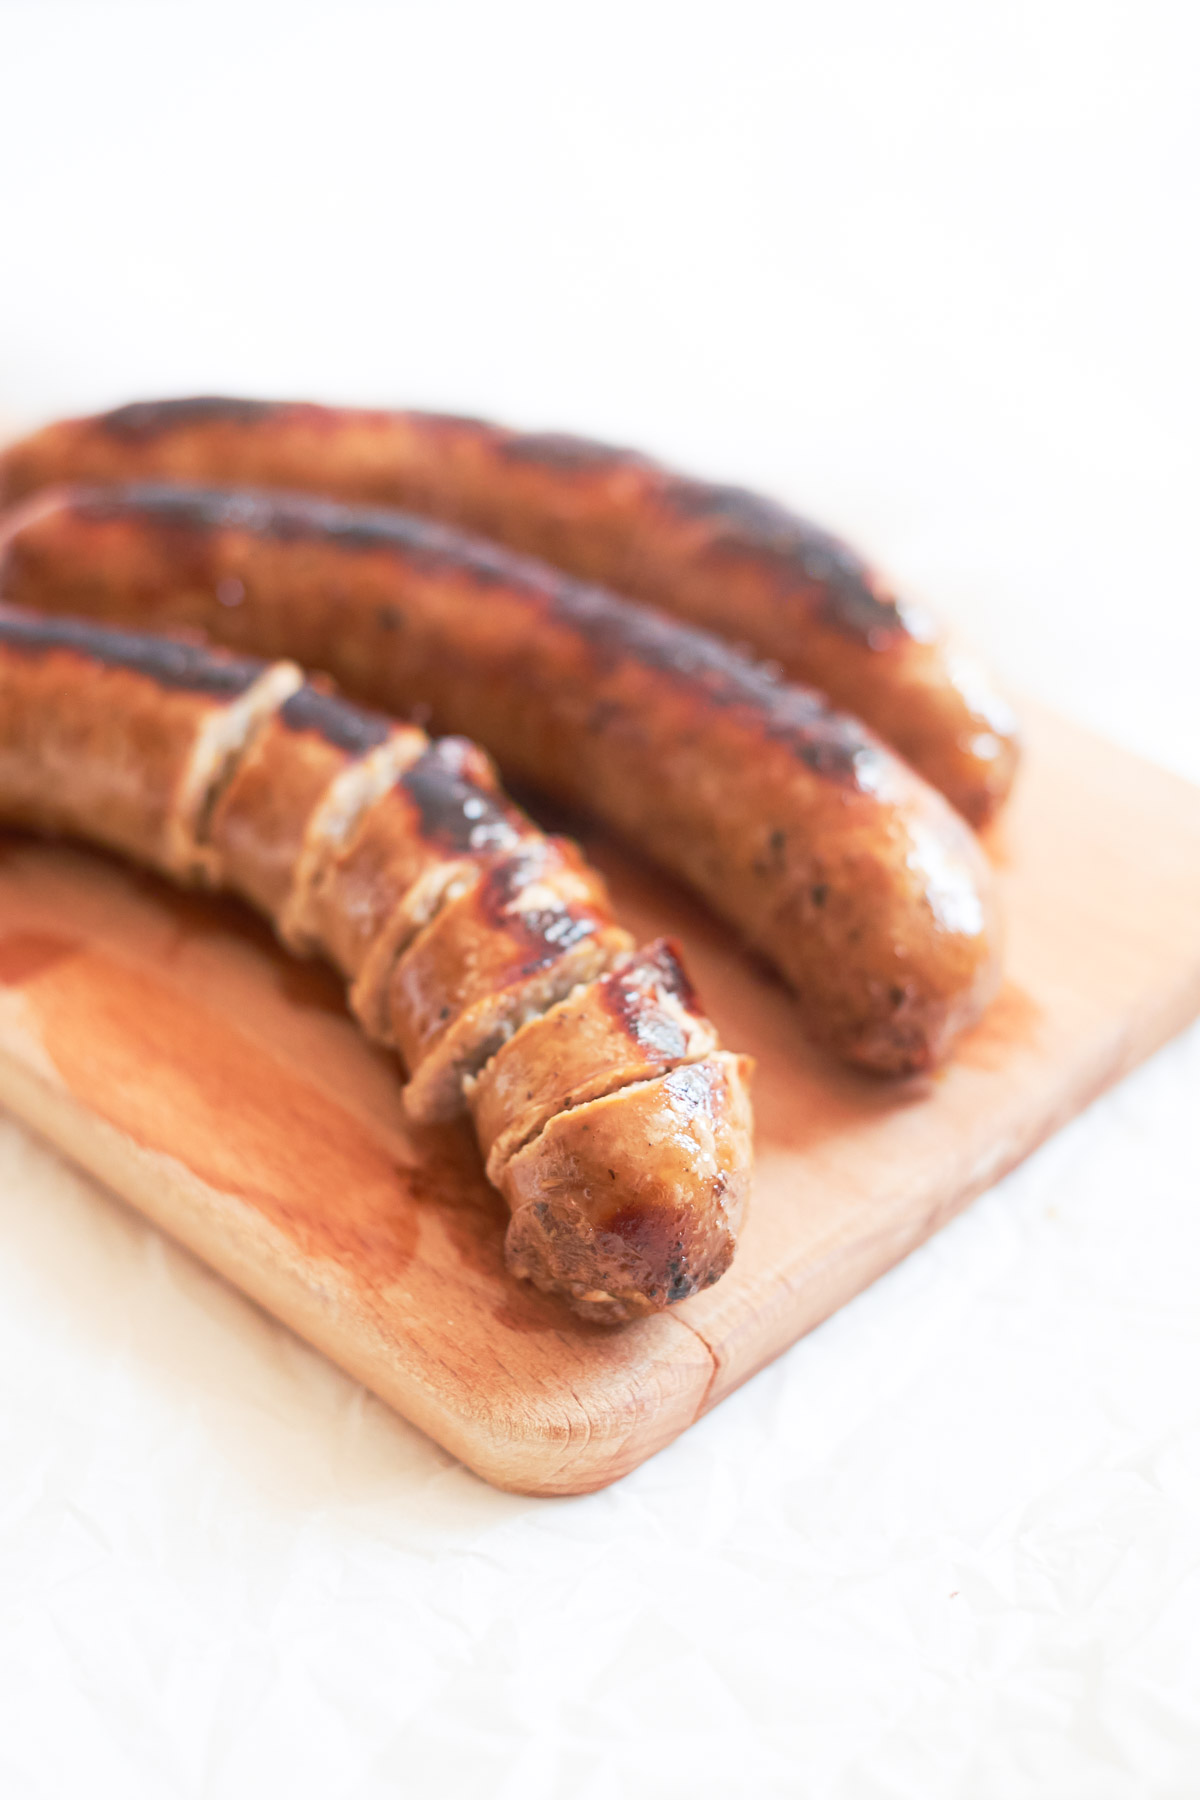 How To Cook Italian Sausage on Stove